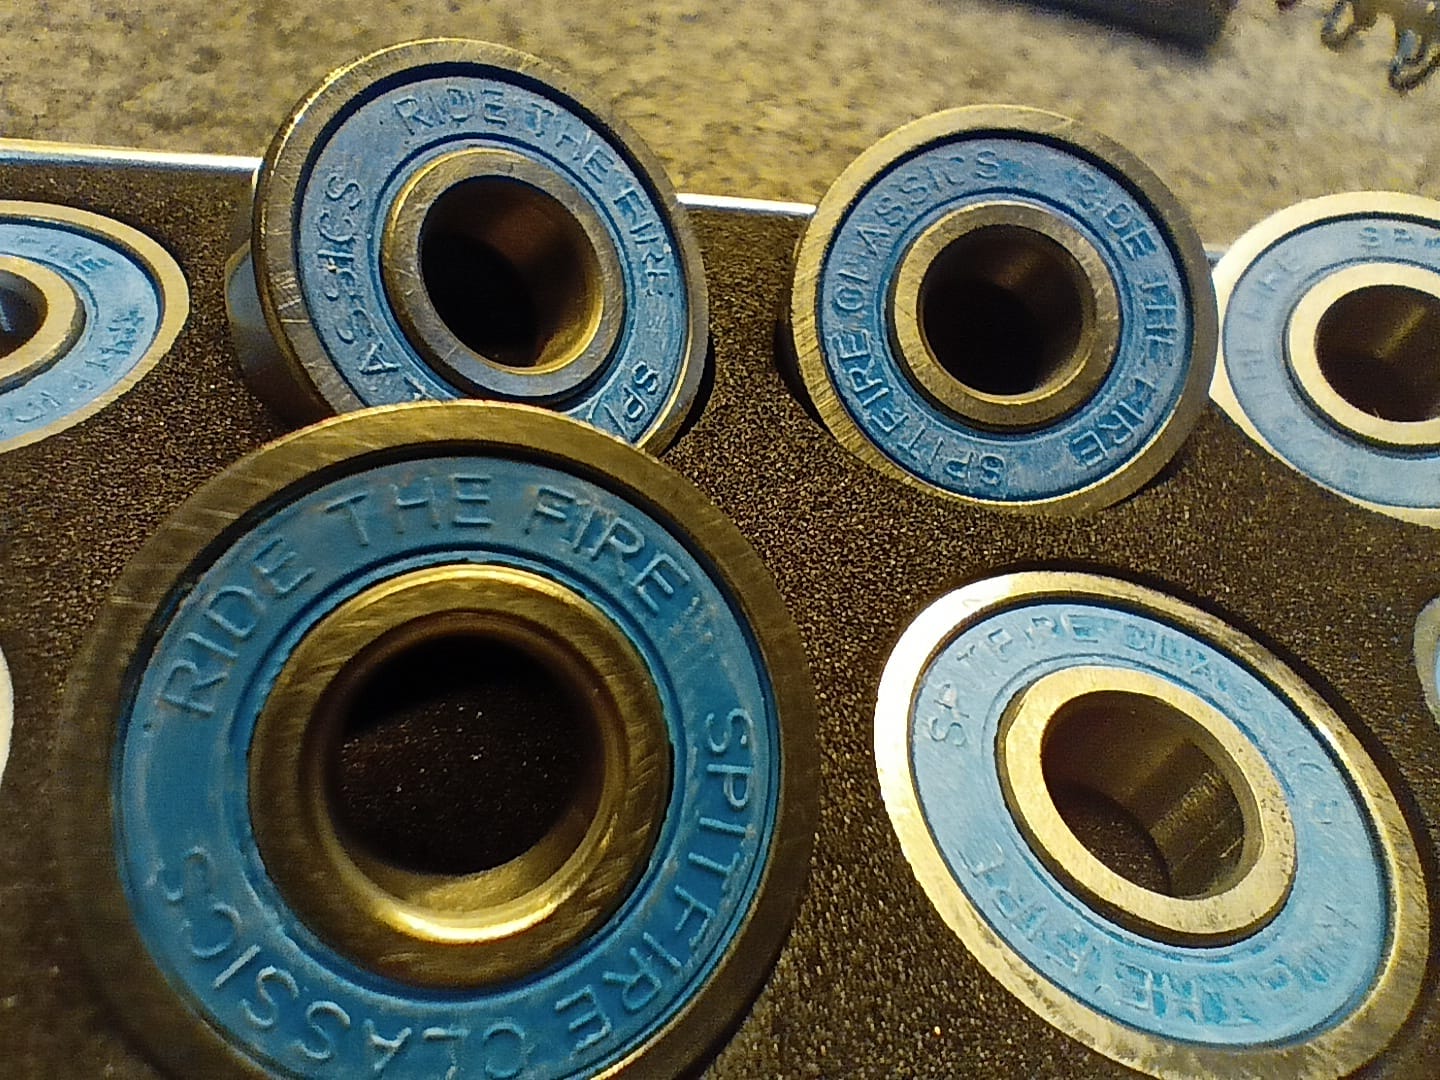 Both bearings have chromium steel rings to be heat resistant. Nylon cages are used to hold the balls, but it would be better to have steel or brass.